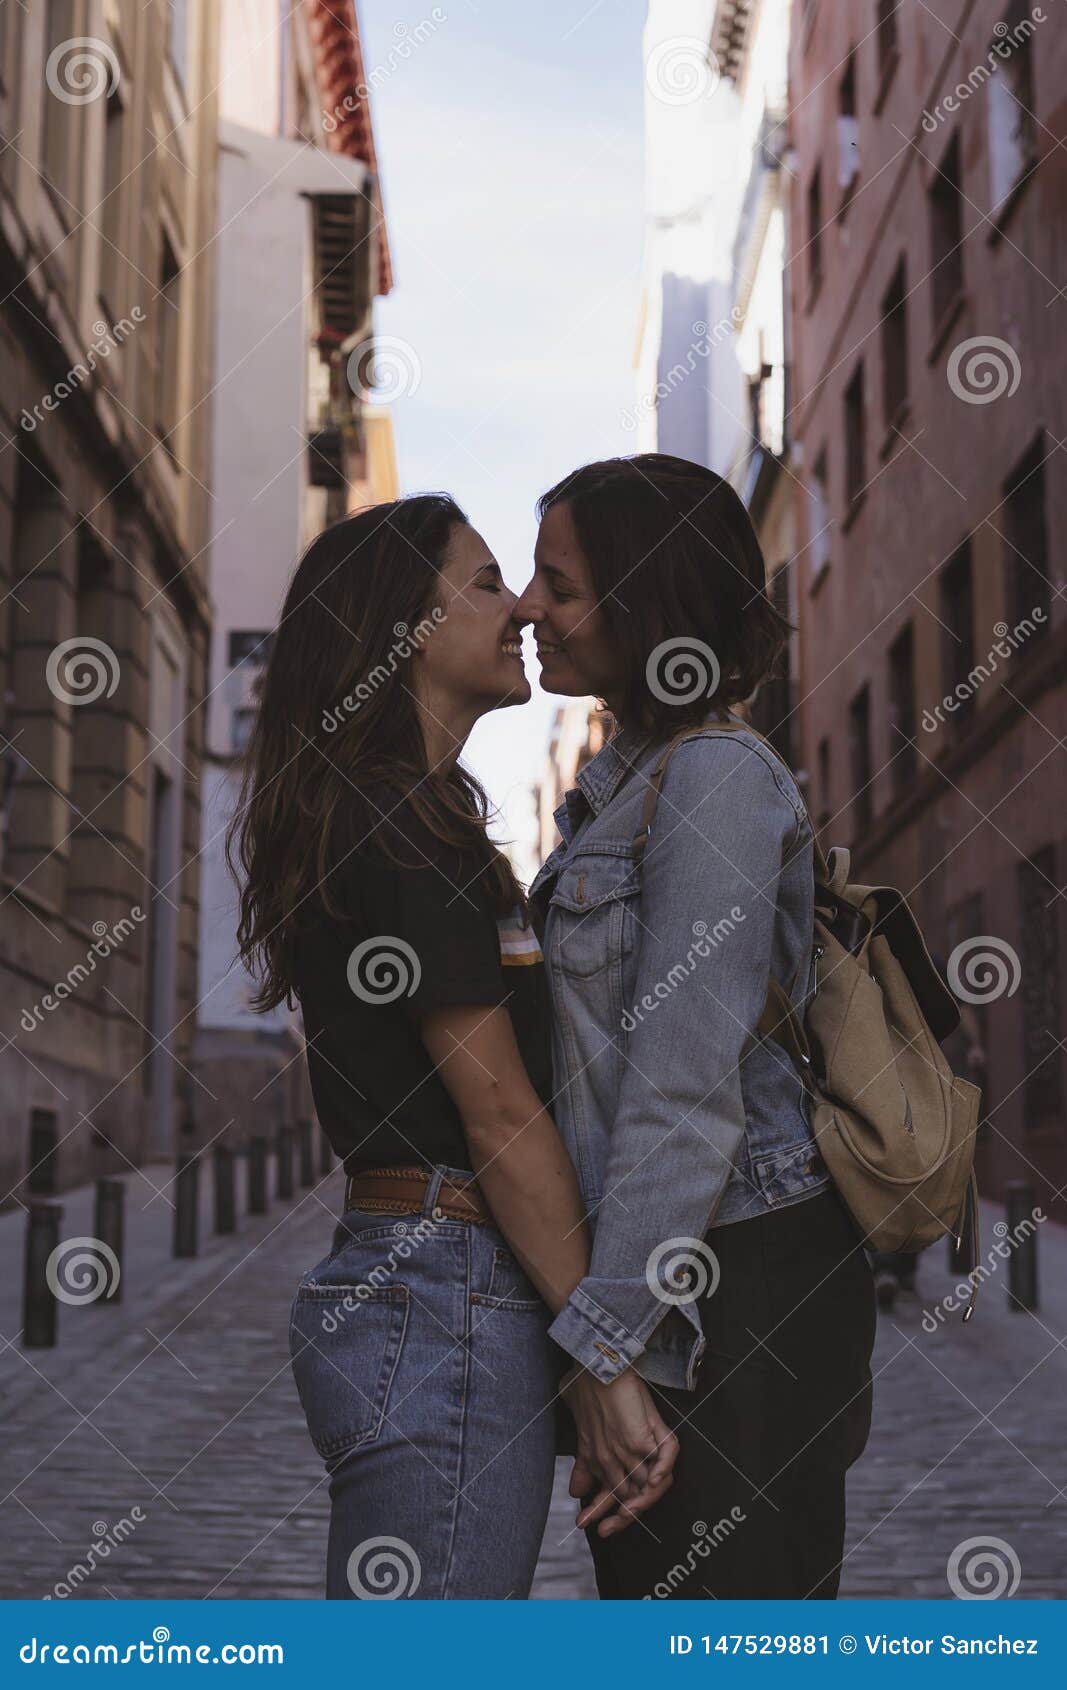 Attractive Young Women Lesbian Couple Kissing And Smiling In A Street Of Madrid Stock Image